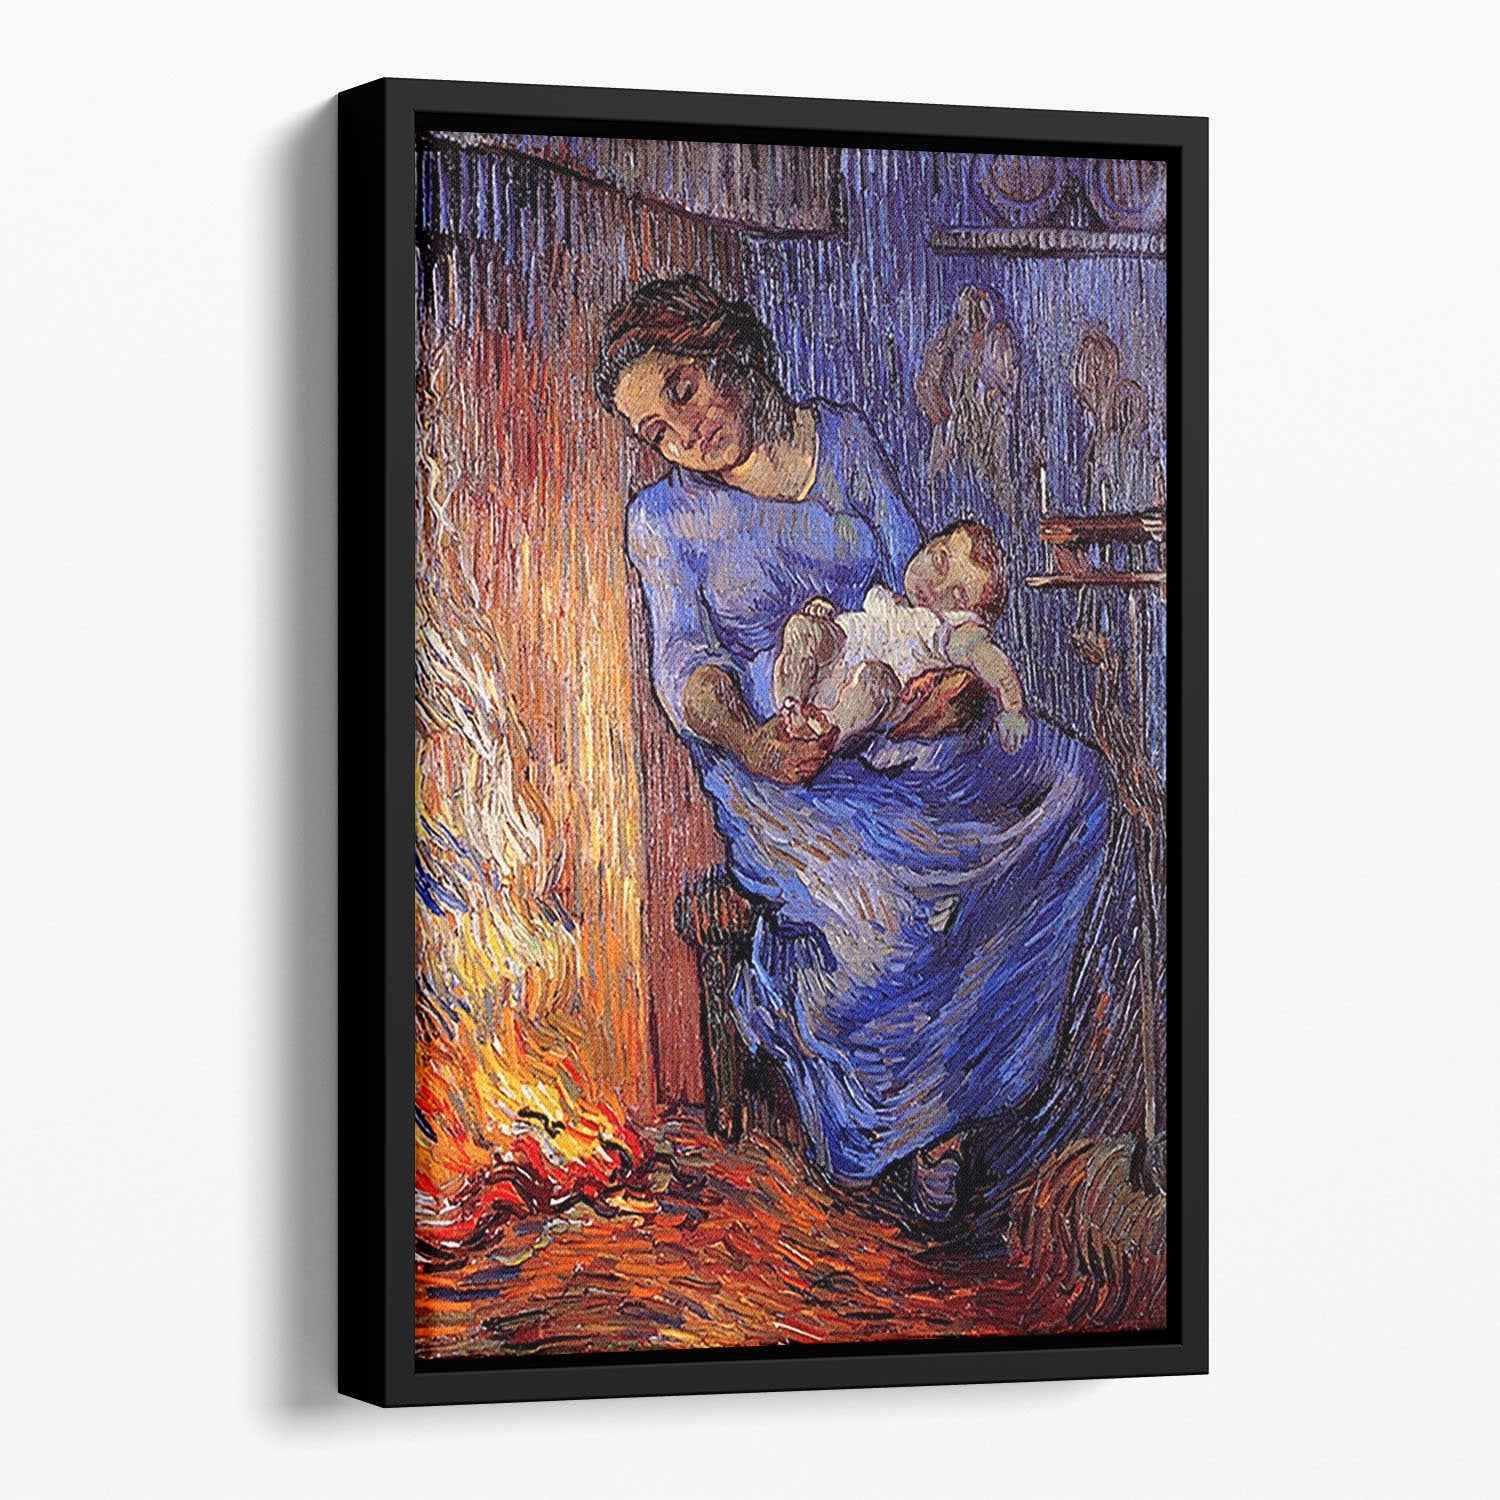 The Man is at Sea after Demont-Breton by Van Gogh Floating Framed Canvas